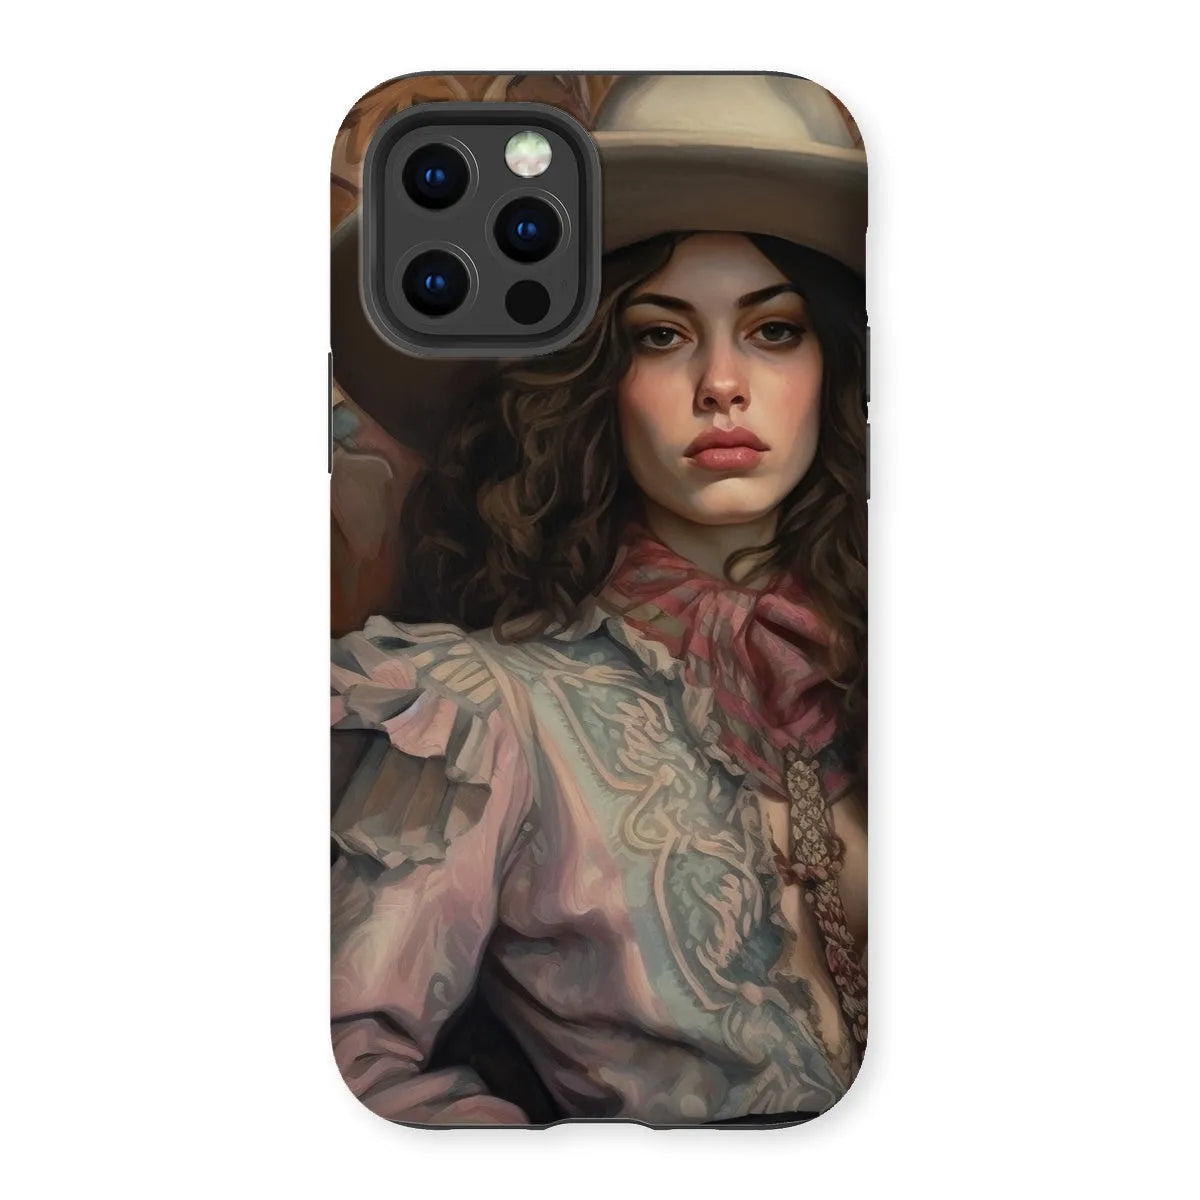 Alex The Lesbian Cowgirl - Sapphic Art Phone Case - Iphone 12 Pro / Matte - Mobile Phone Cases - Aesthetic Art